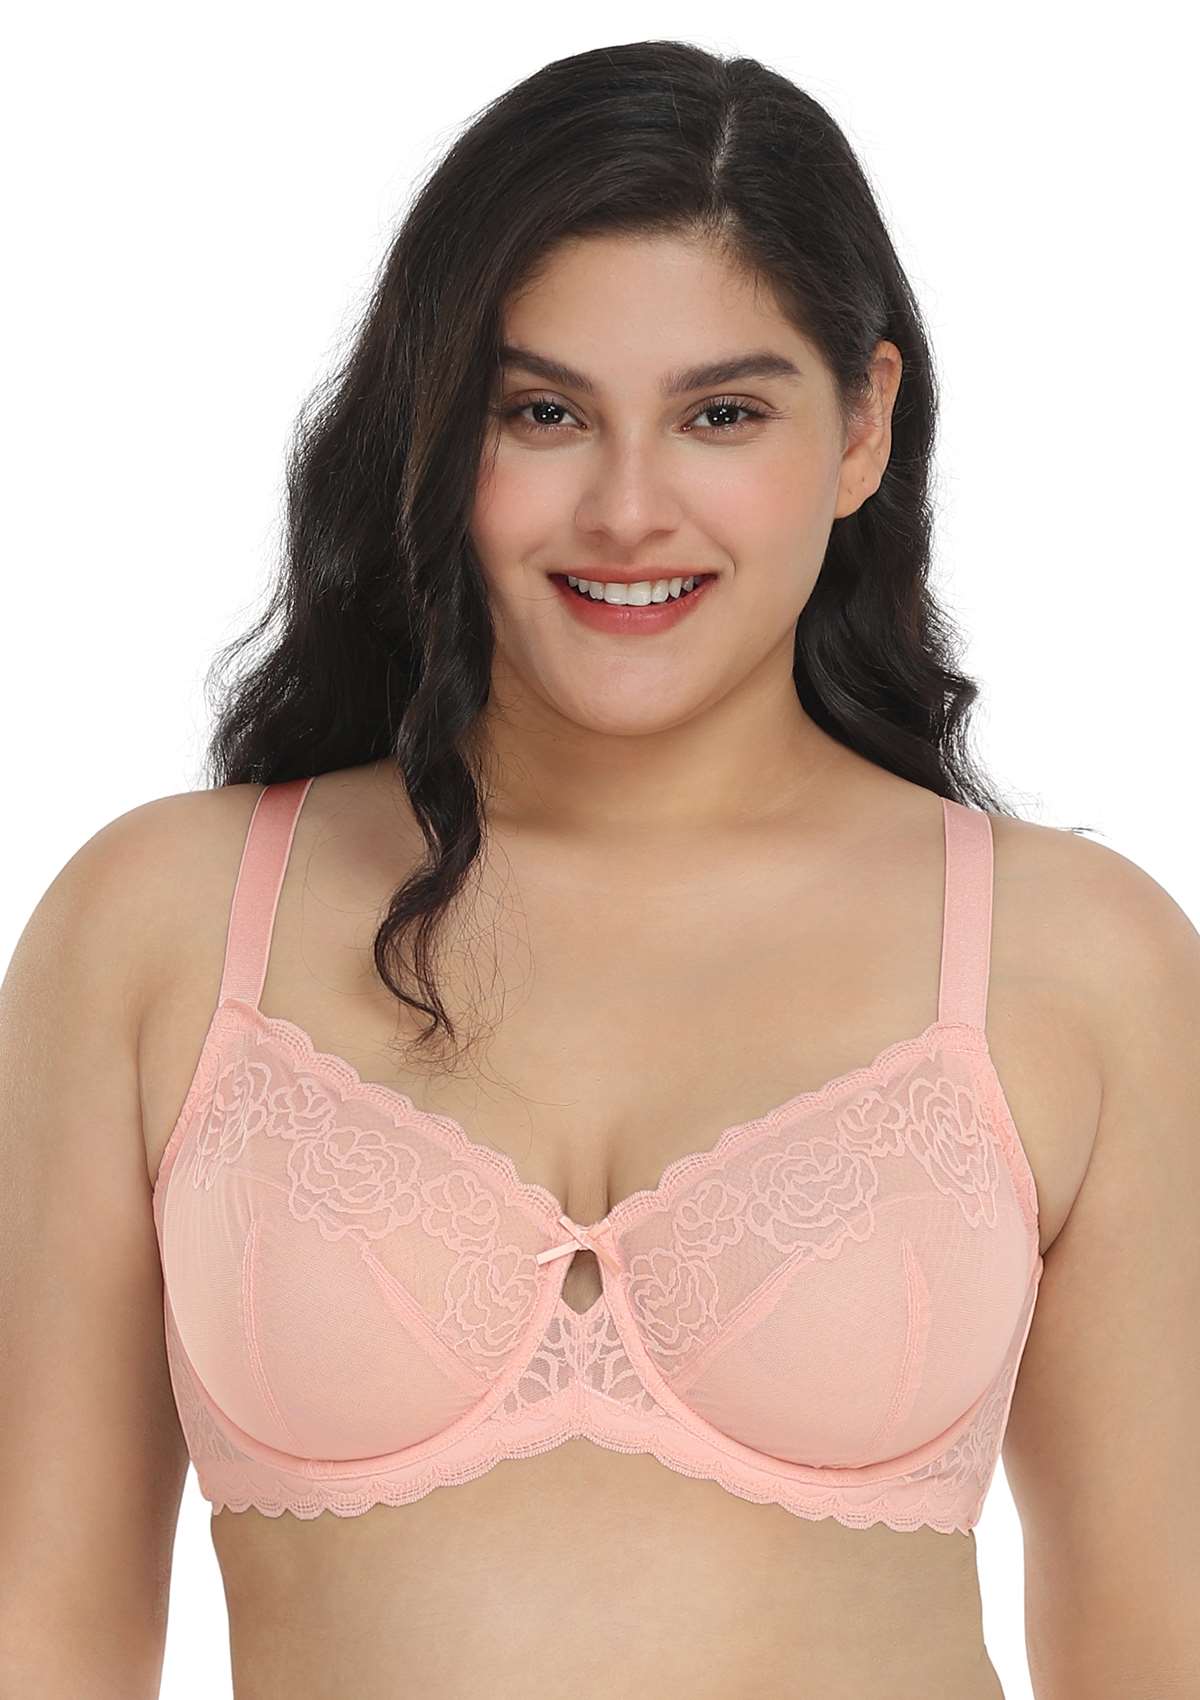 HSIA Rosa Bonica Sheer Lace Mesh Unlined Thin Comfy Woman Bra - Pink / 34 / D